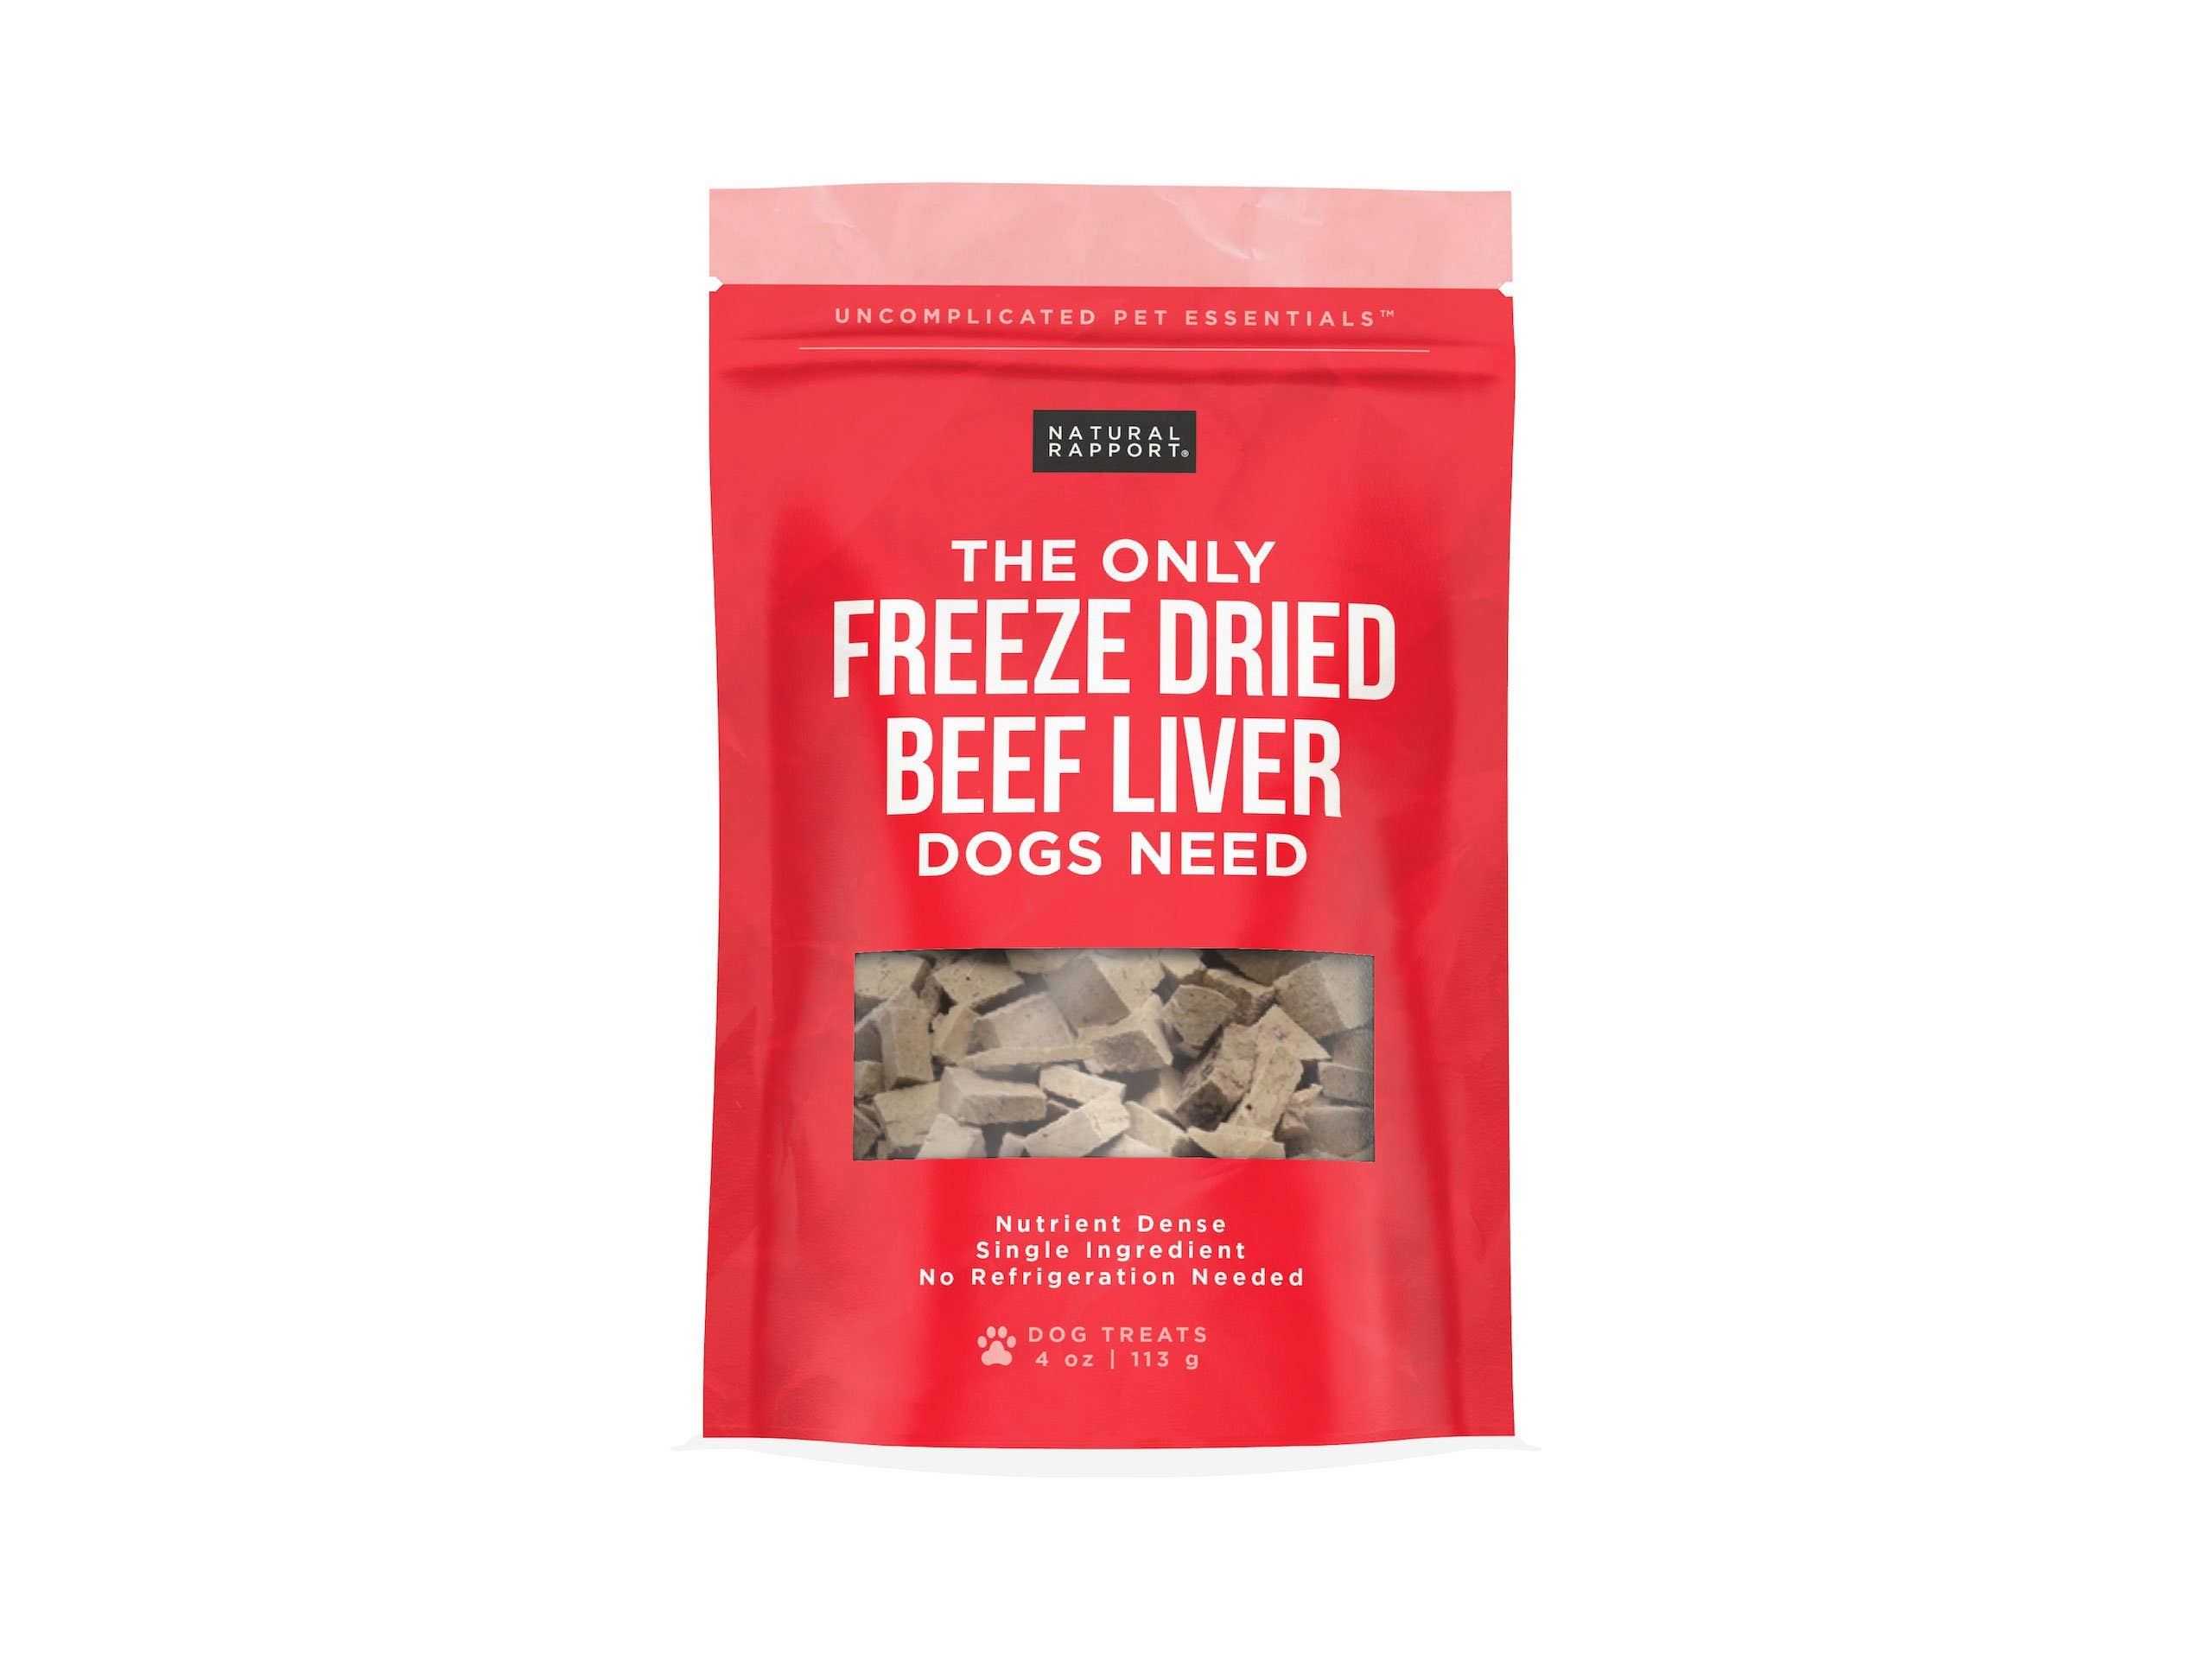 Natural Rapport - The Only Freeze Dried Beef Liver Dogs Need